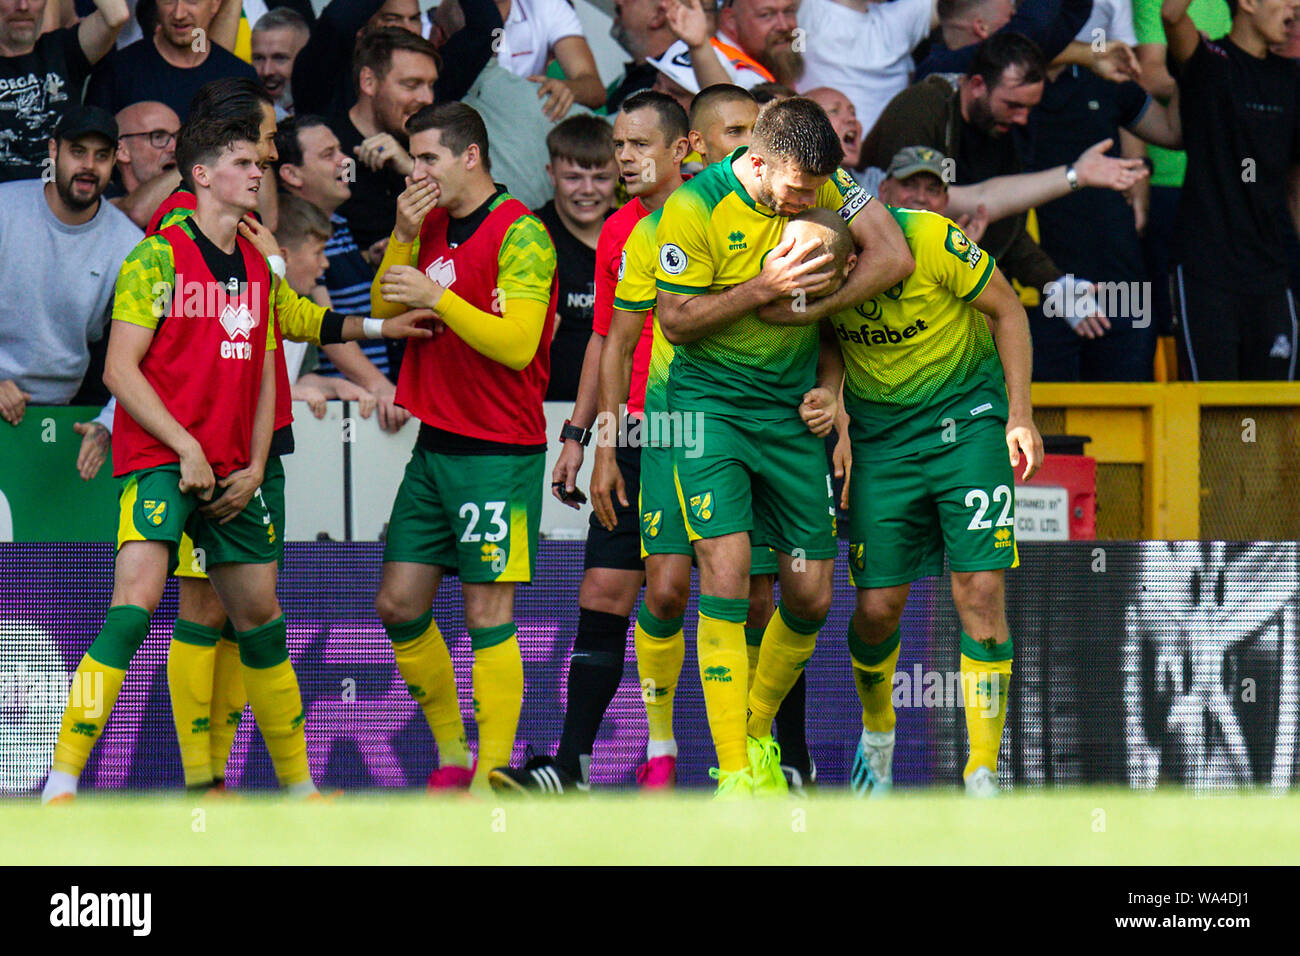 Norwich, UK. 17th Aug 2019. A kiss on the head from Grant Hanley of Norwich City for Teemu Pukki after scoring his third goal of the game in the Premier League match between Norwich City and Newcastle United at Carrow Road, Norwich on Saturday 17th August 2019. Editorial use only, license required for commercial use. Photograph may only be used for newspaper and/or magazine editorial purposes. (Credit: Alan Hayward | MI News) Credit: MI News & Sport /Alamy Live News Stock Photo